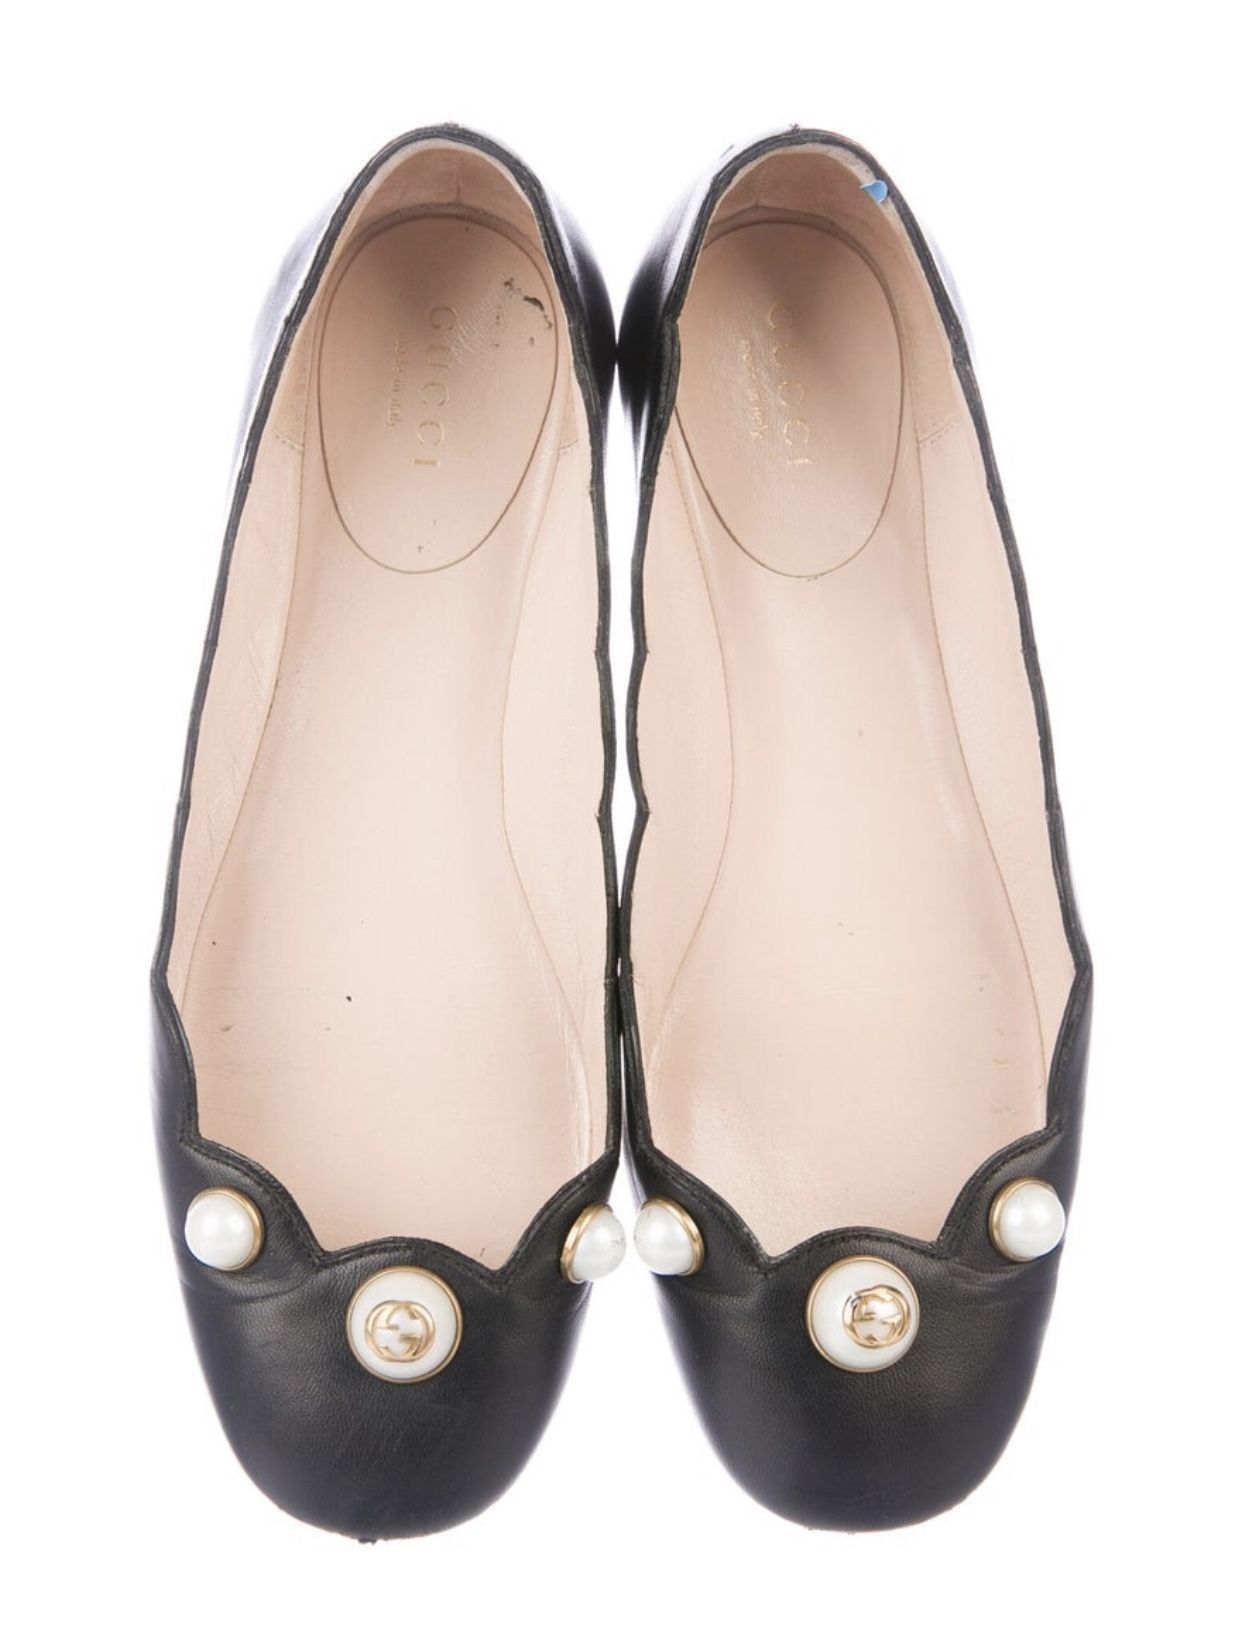 GUCCI leather flats w faux pearl accents GG logo Orig:$1200